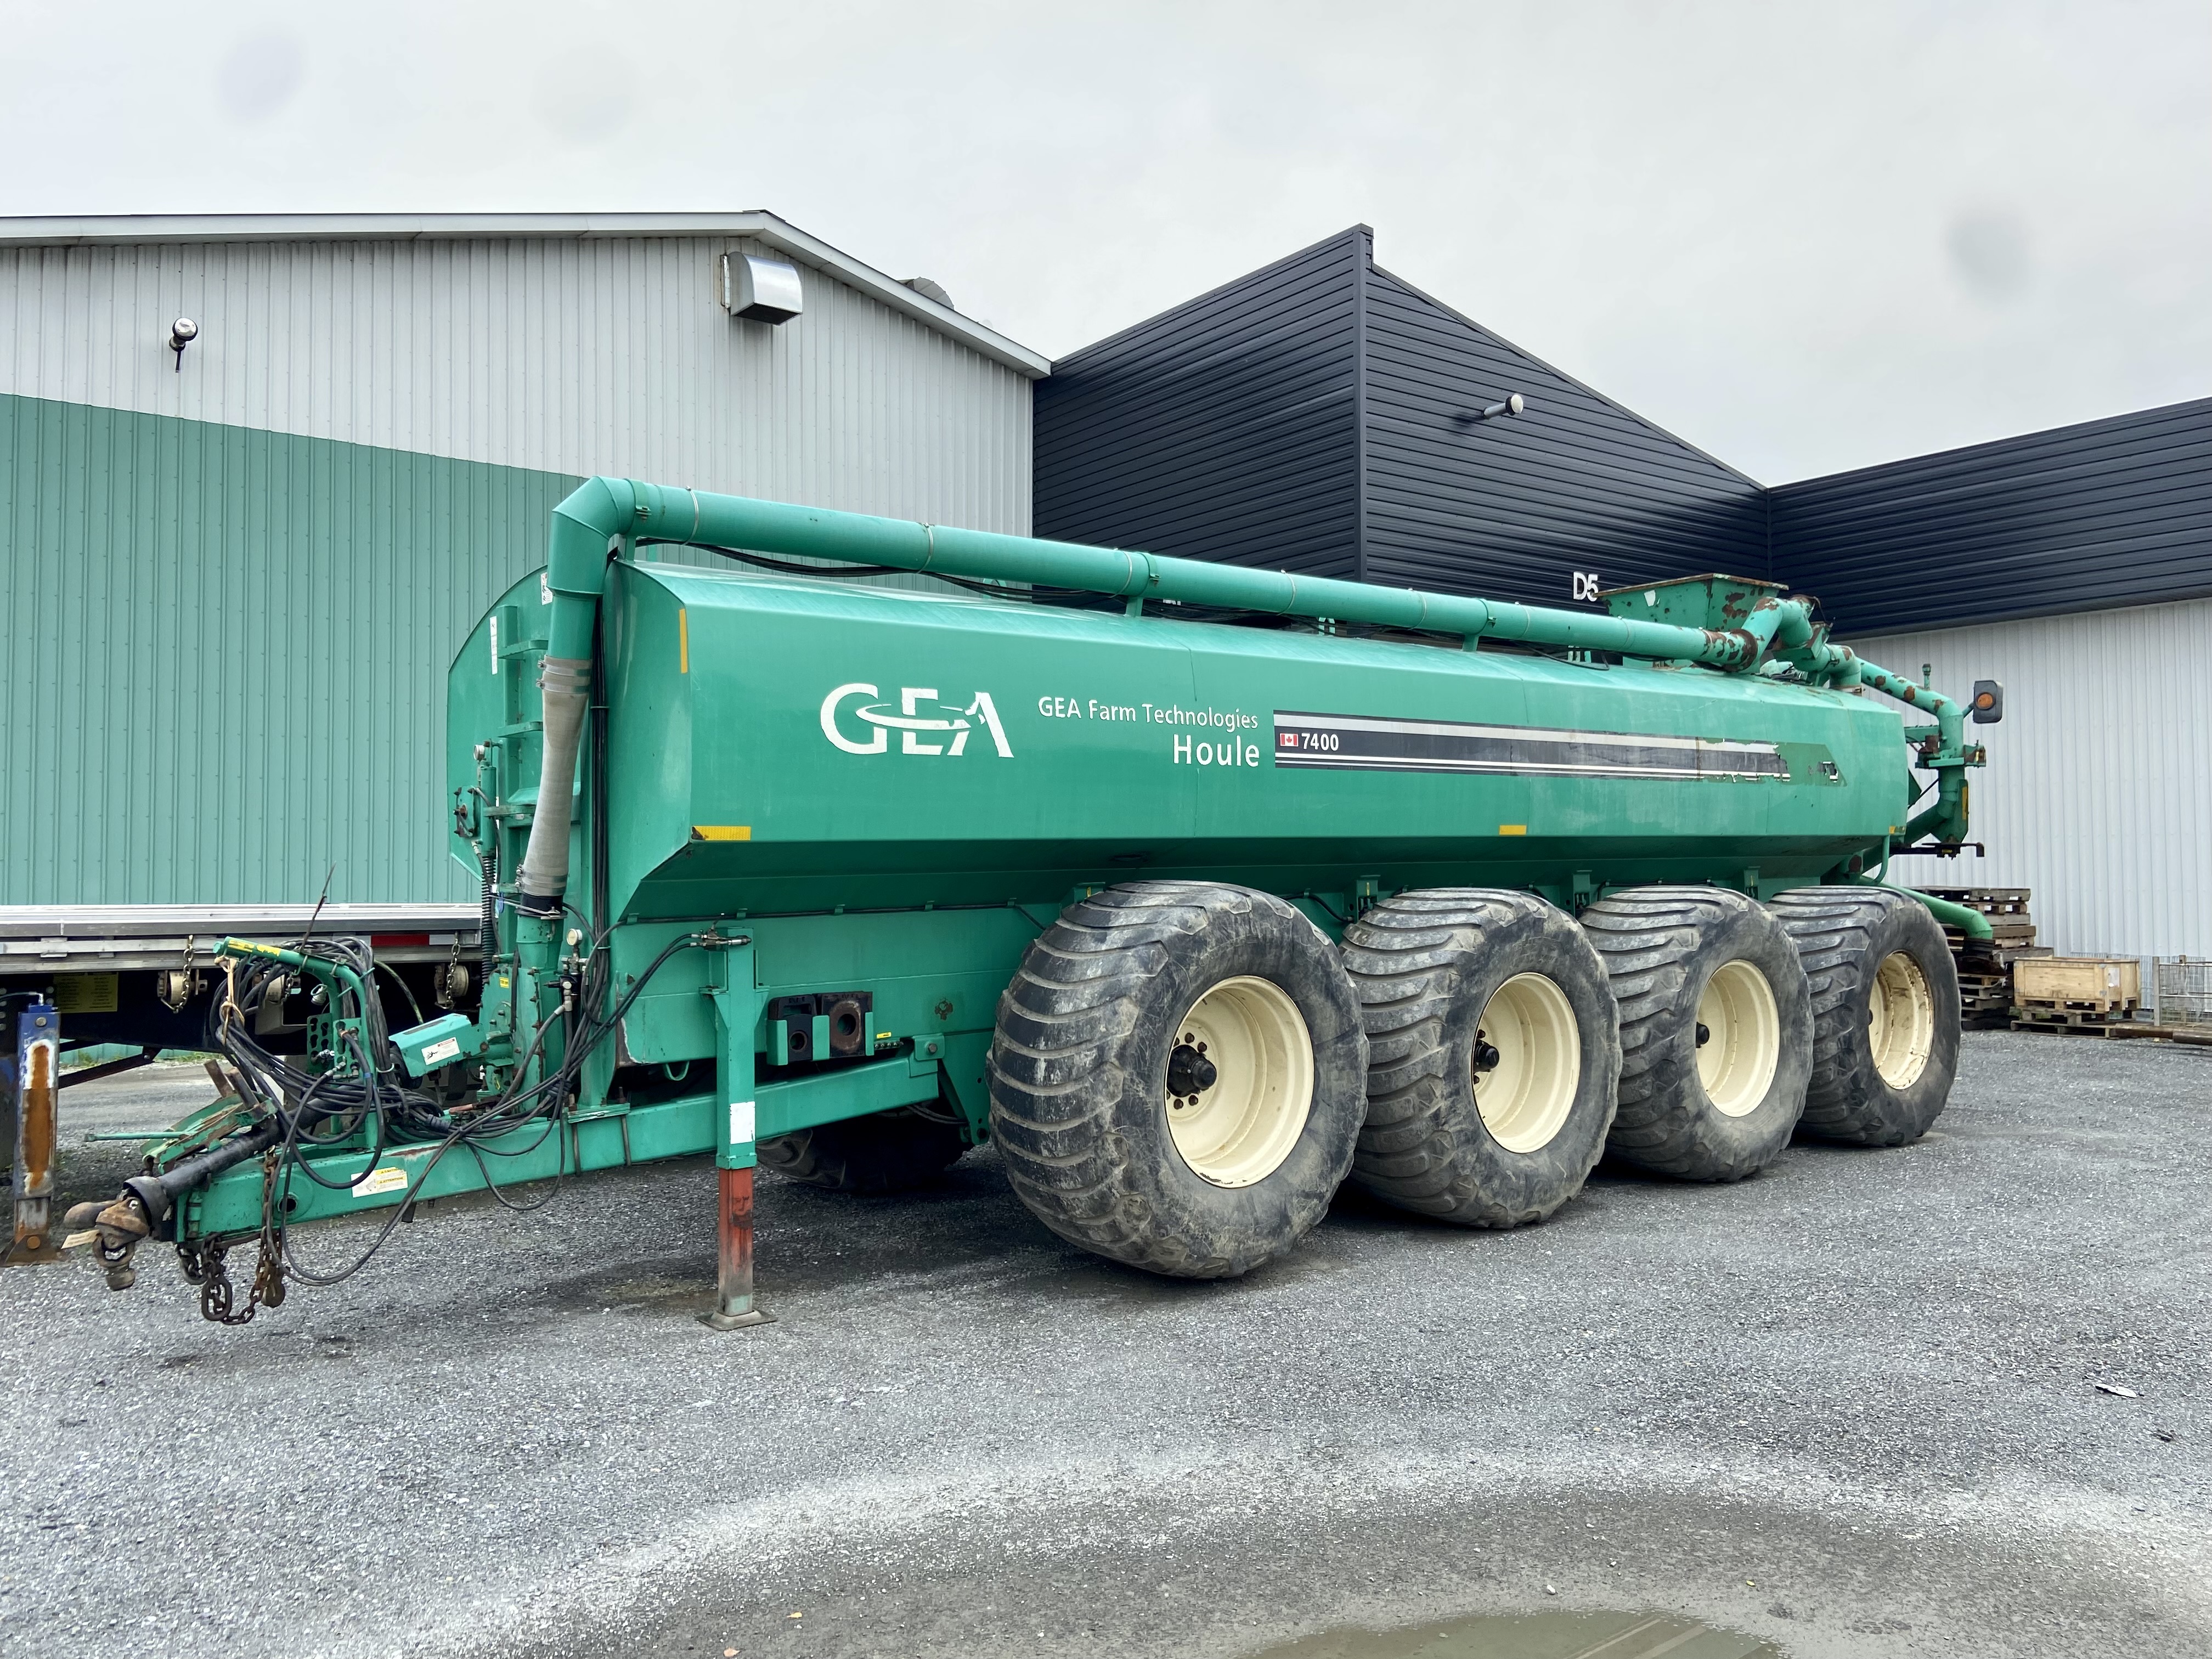 Manure spreader (or liquid manure) Houle 7400 gallons